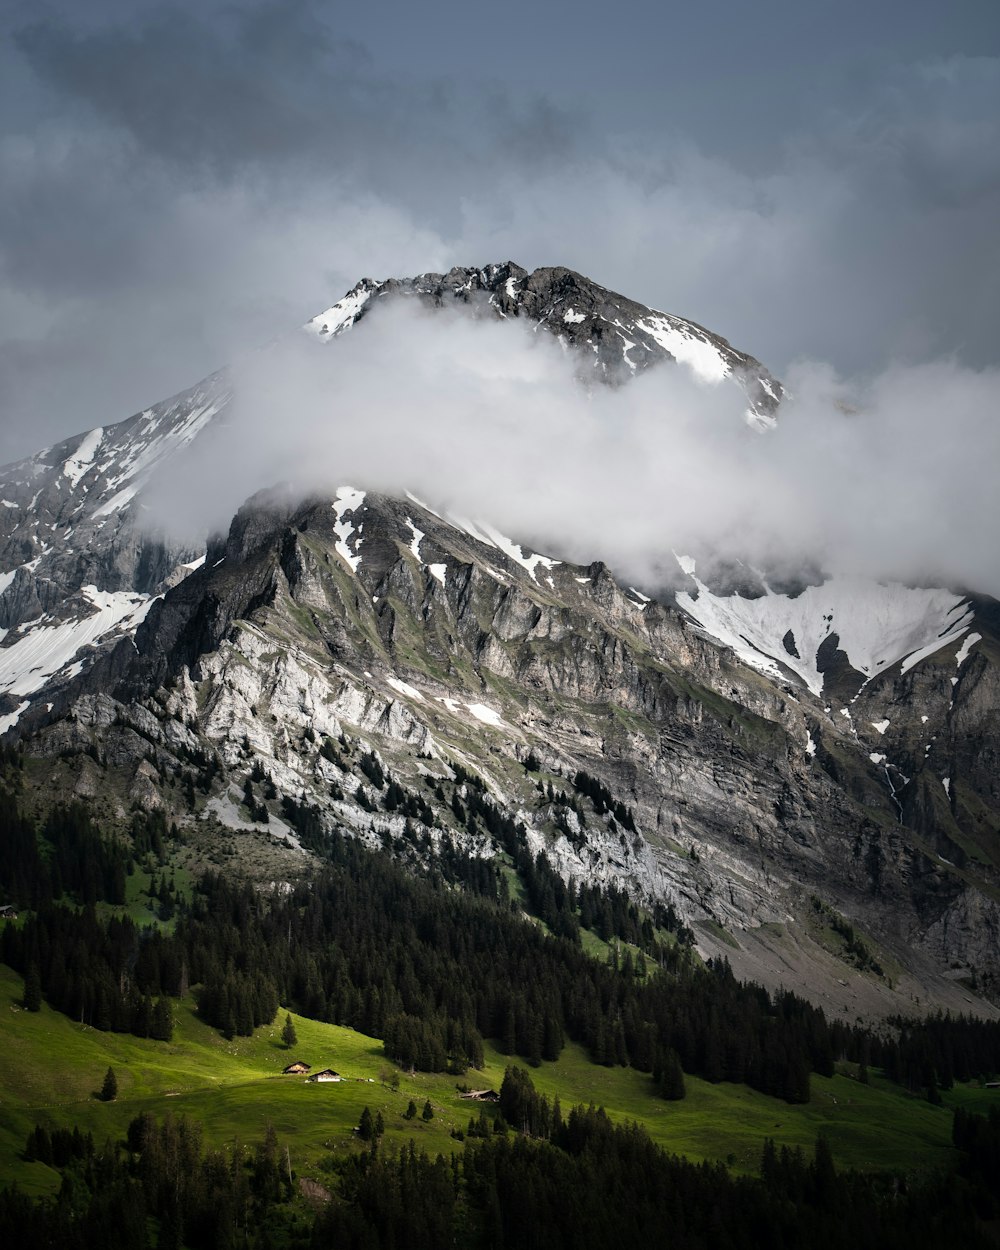 white clouds covering the snow-capped mountain